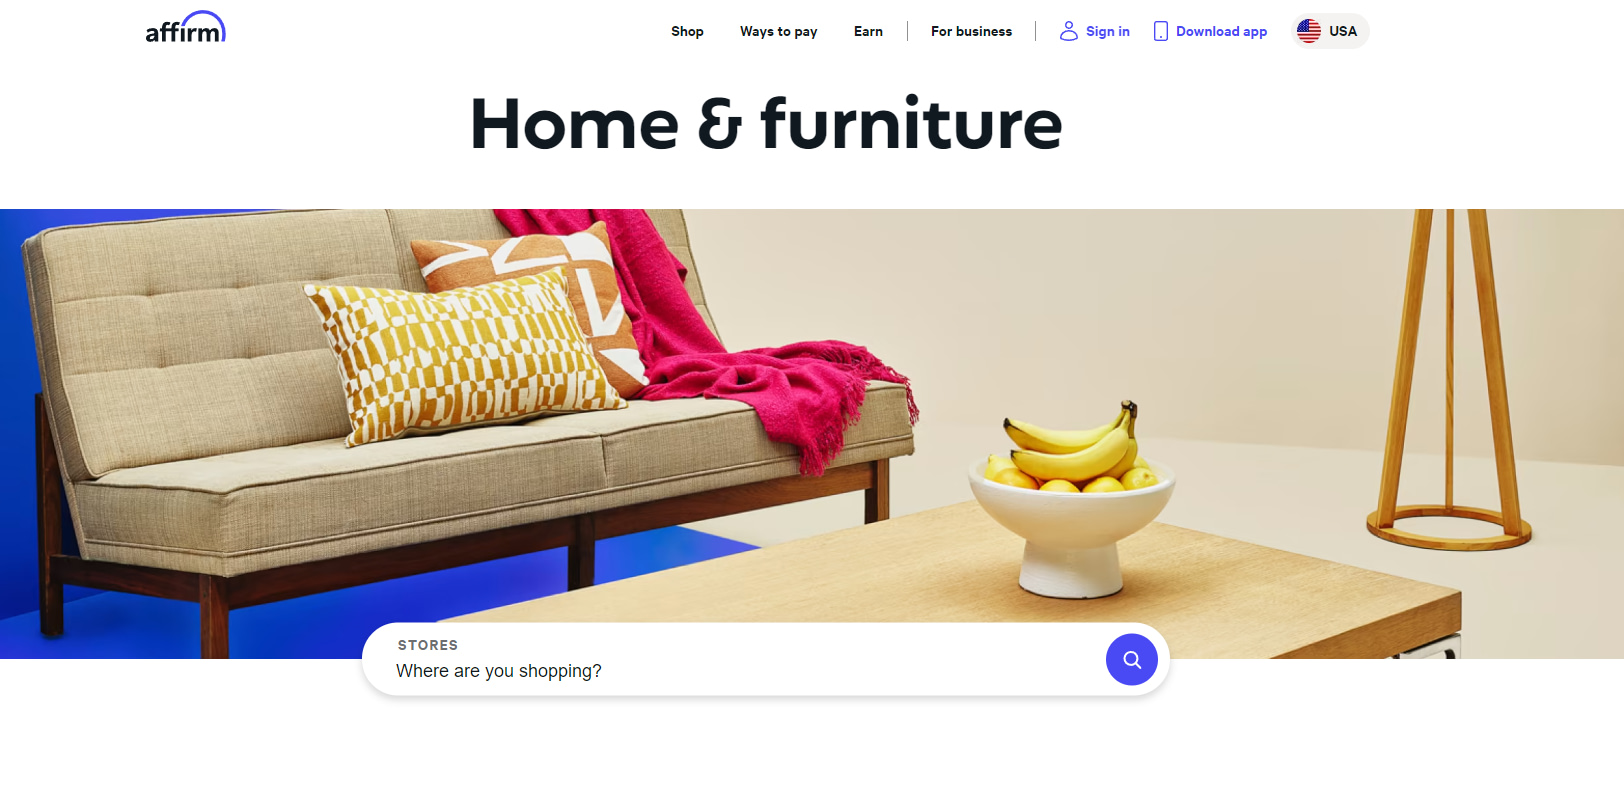 Affirm - Home and Furniture page